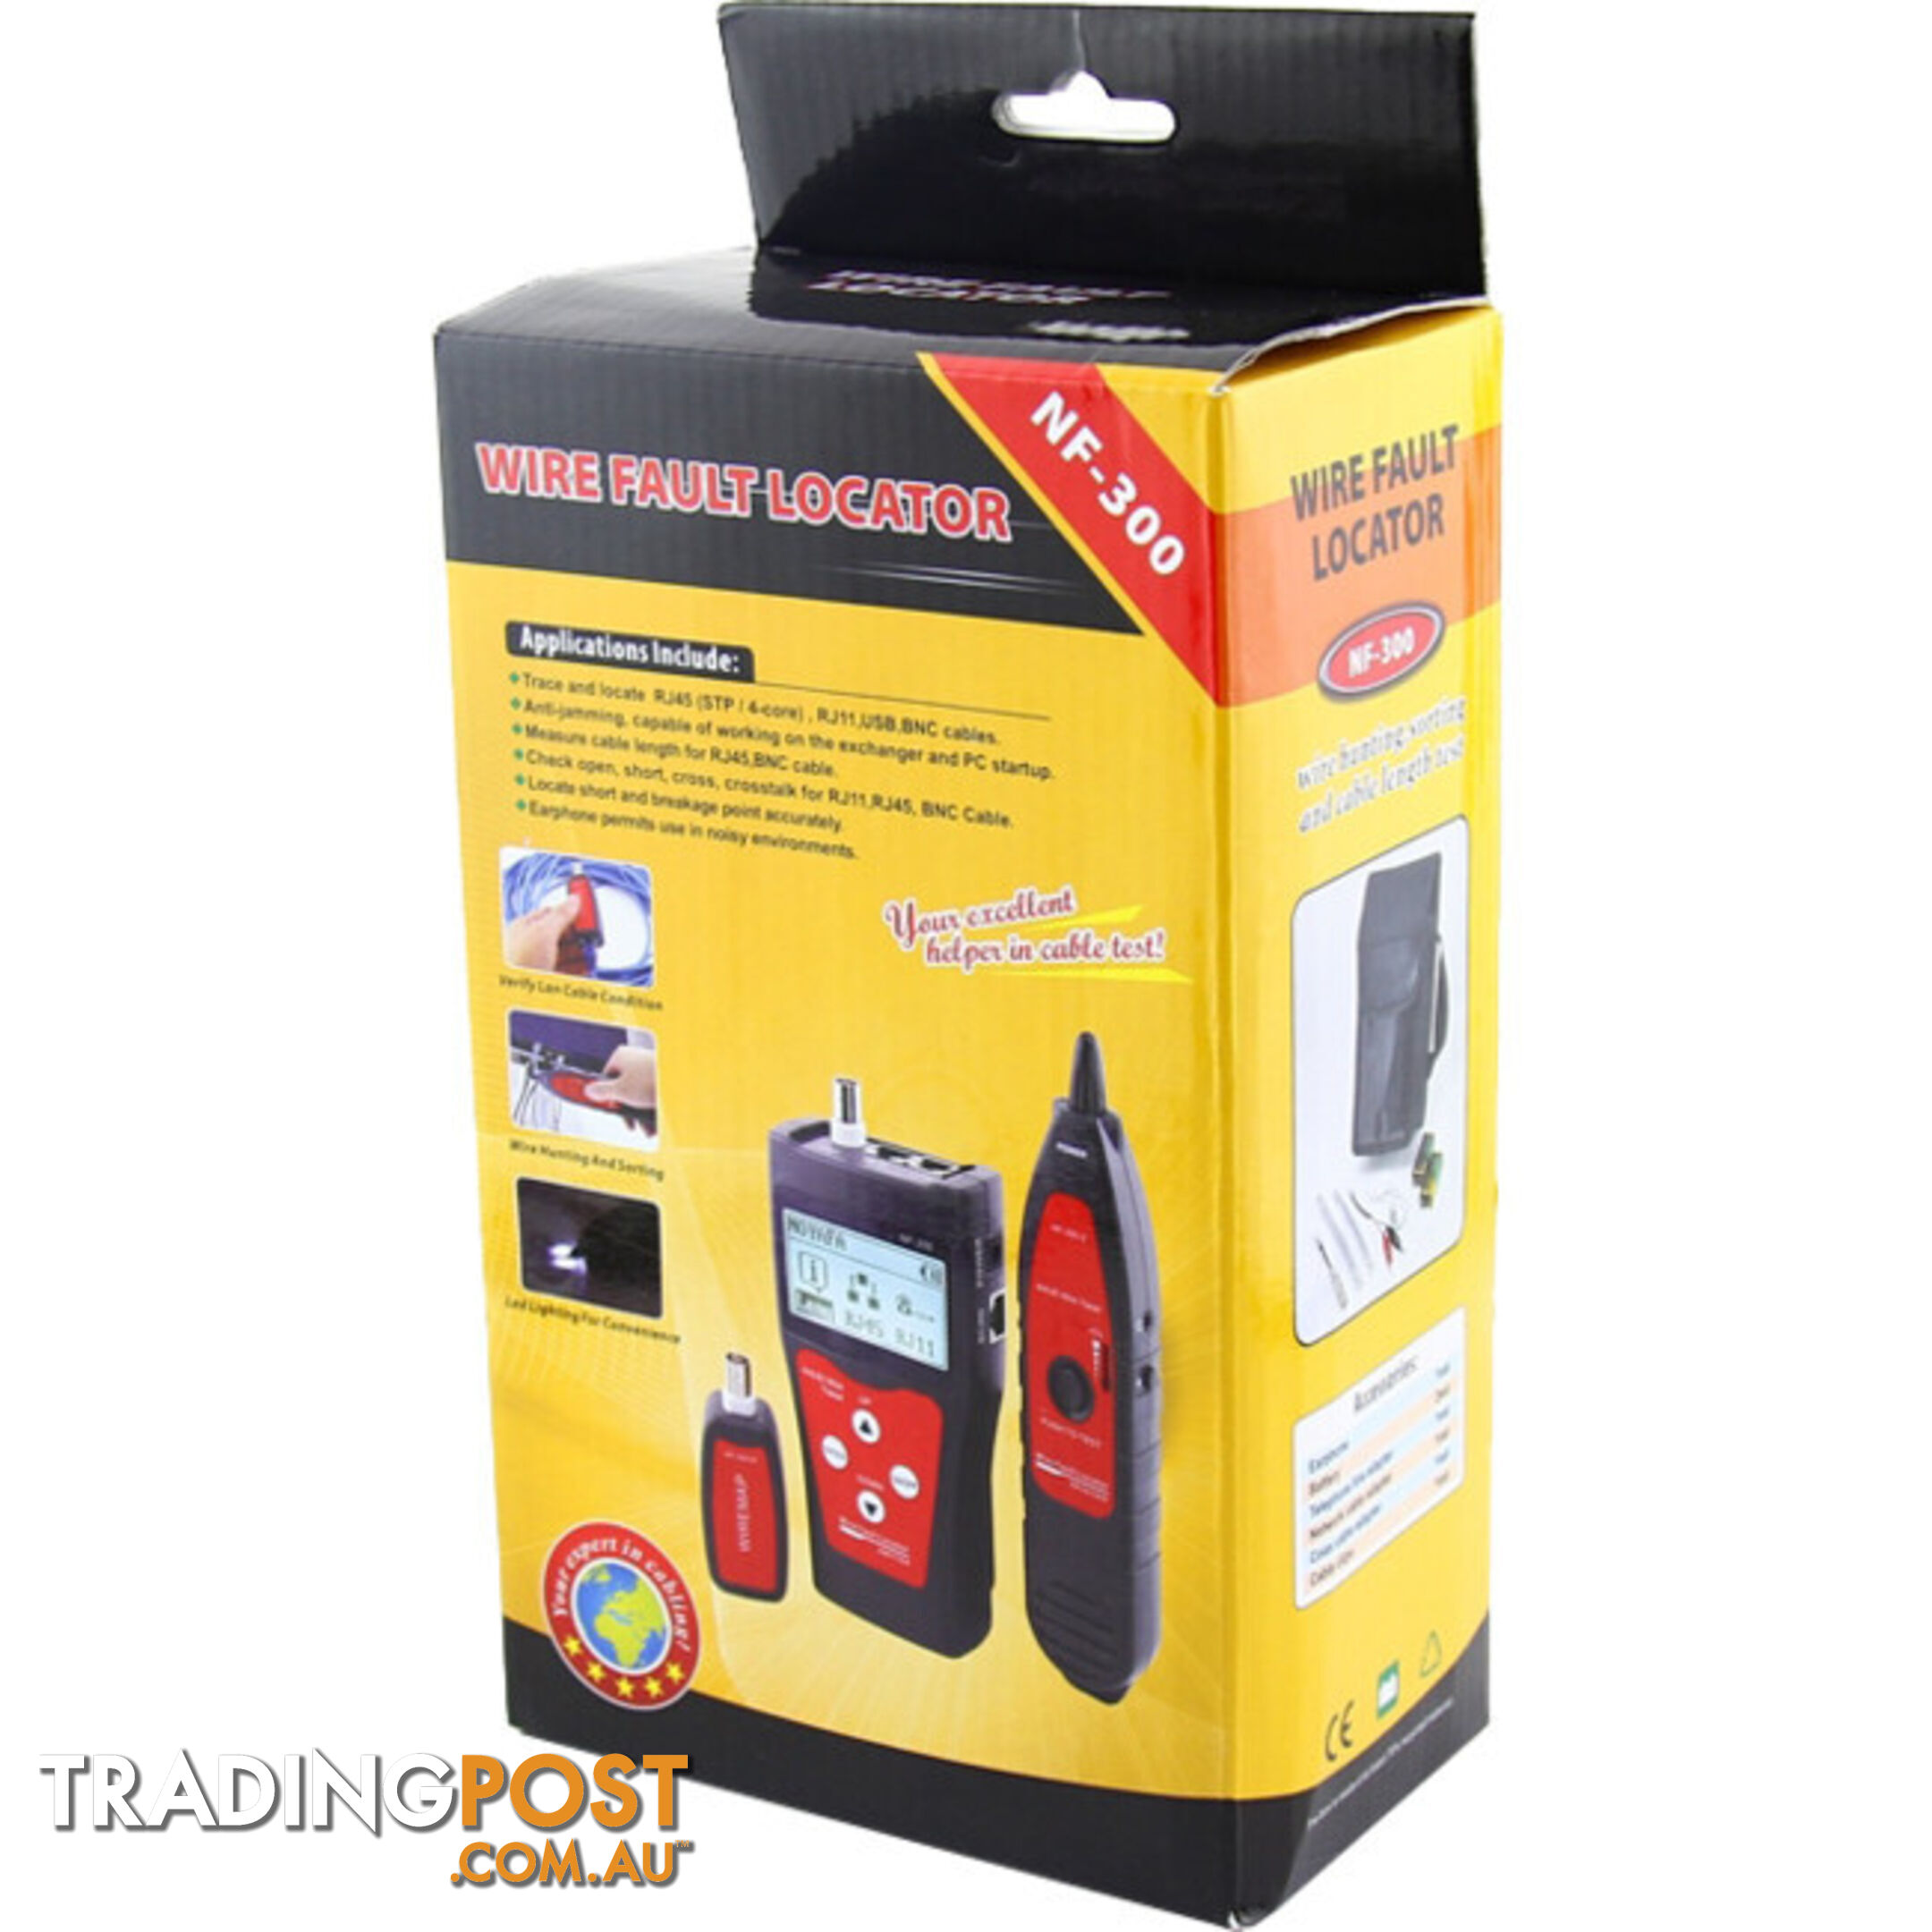 NF300 NETWORK COAX CABLE TESTER FLASHING PORT FUNCTION